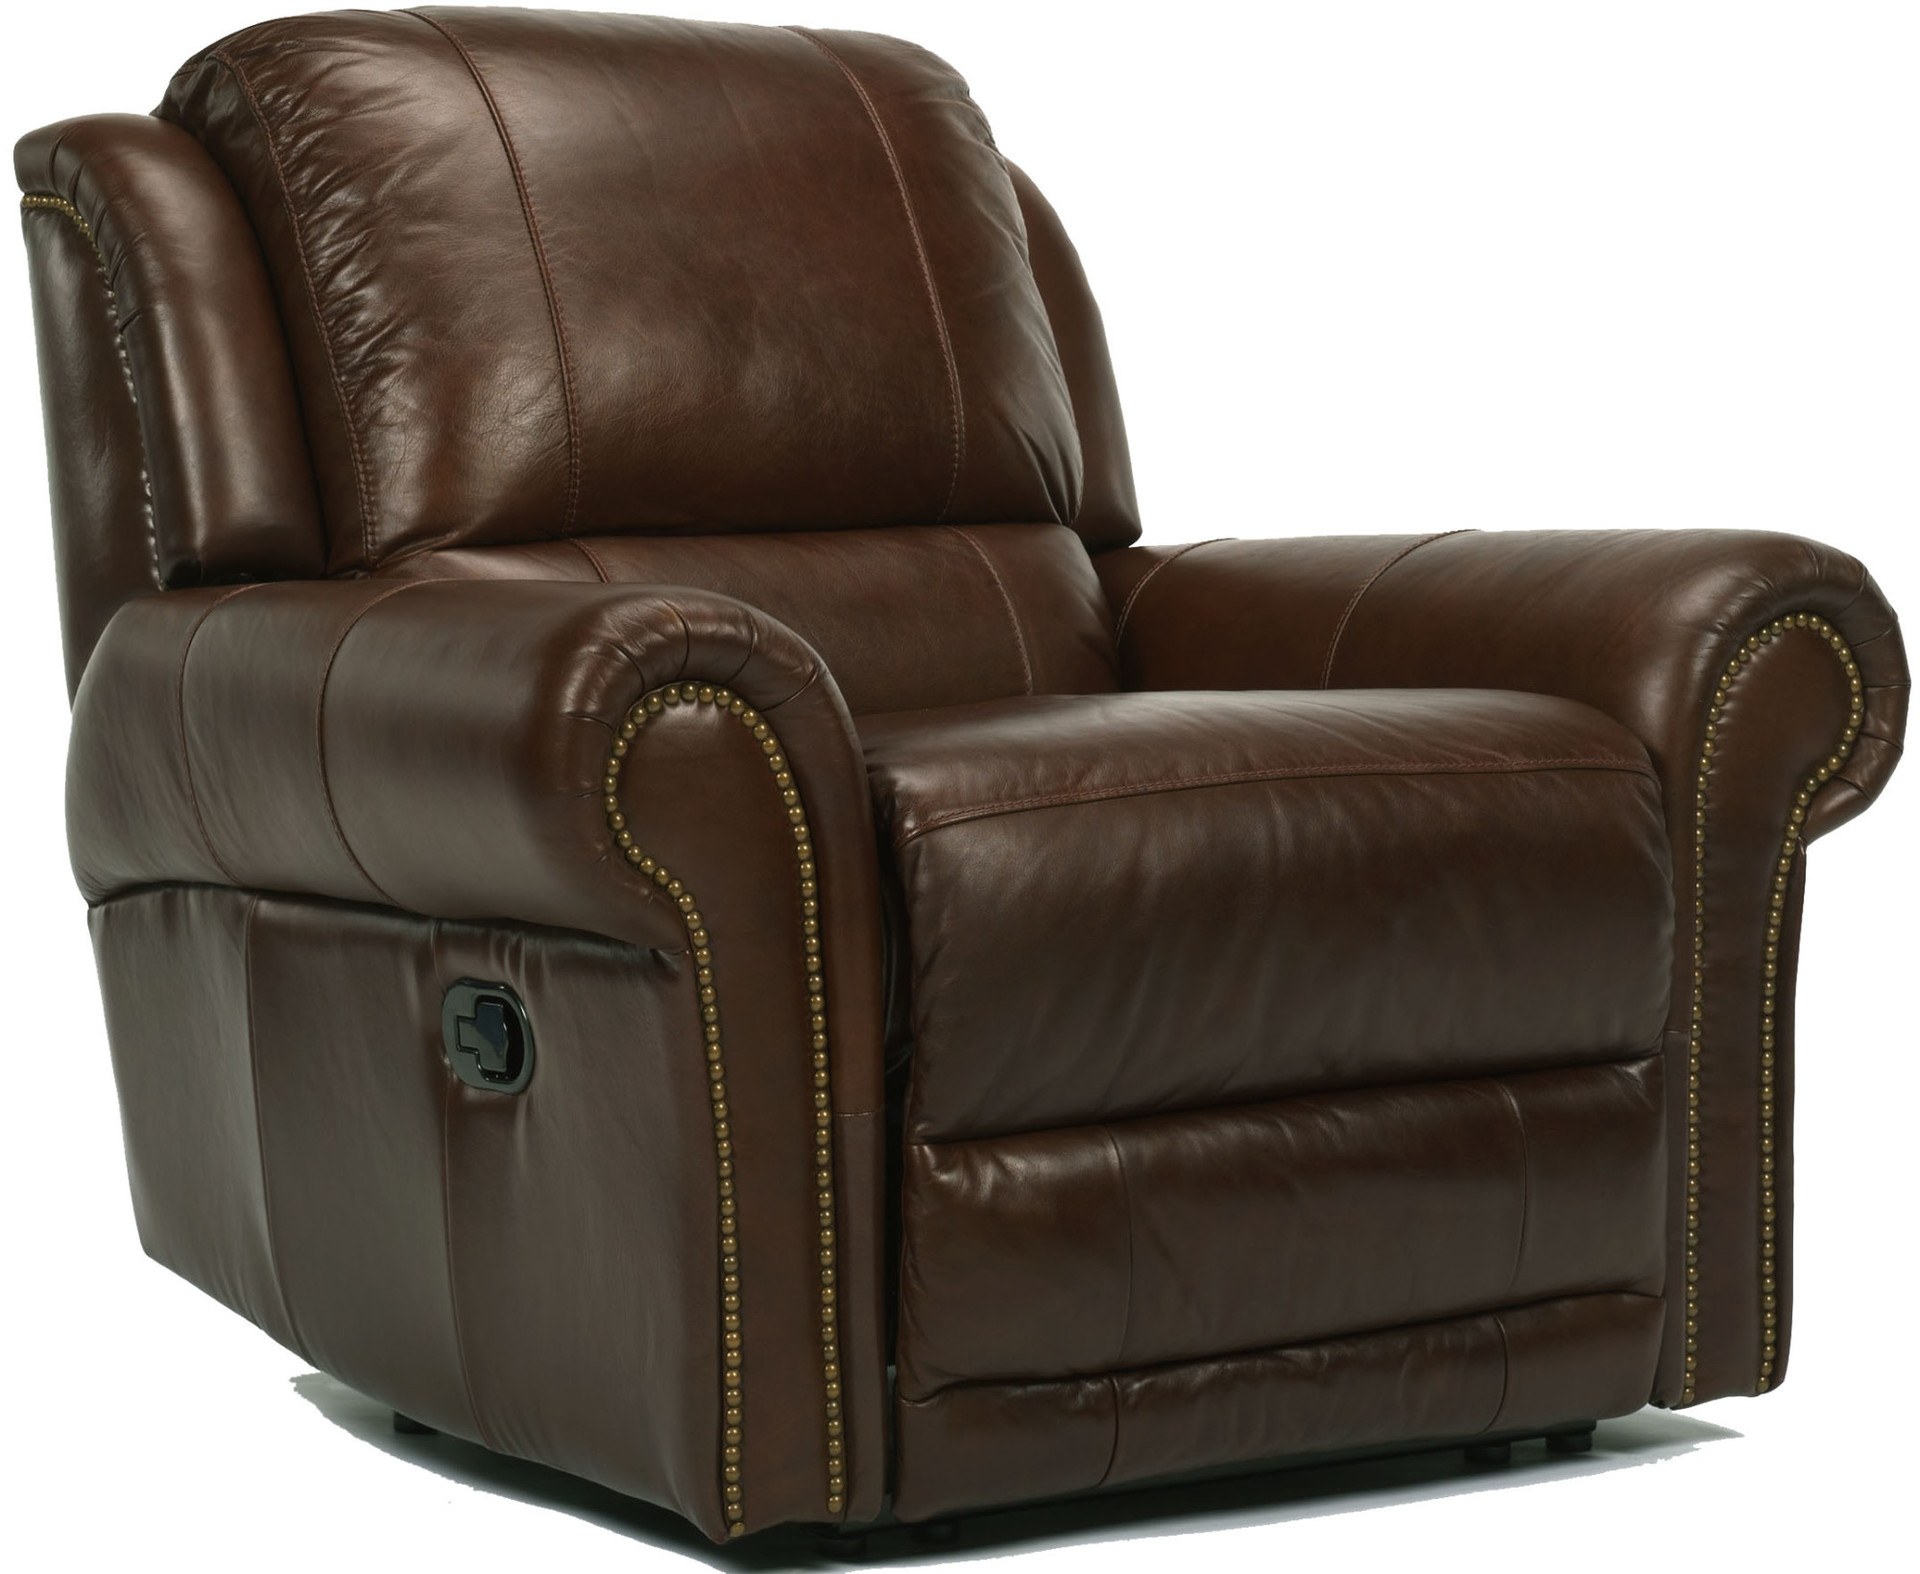 Recliners and Rocker Recliners